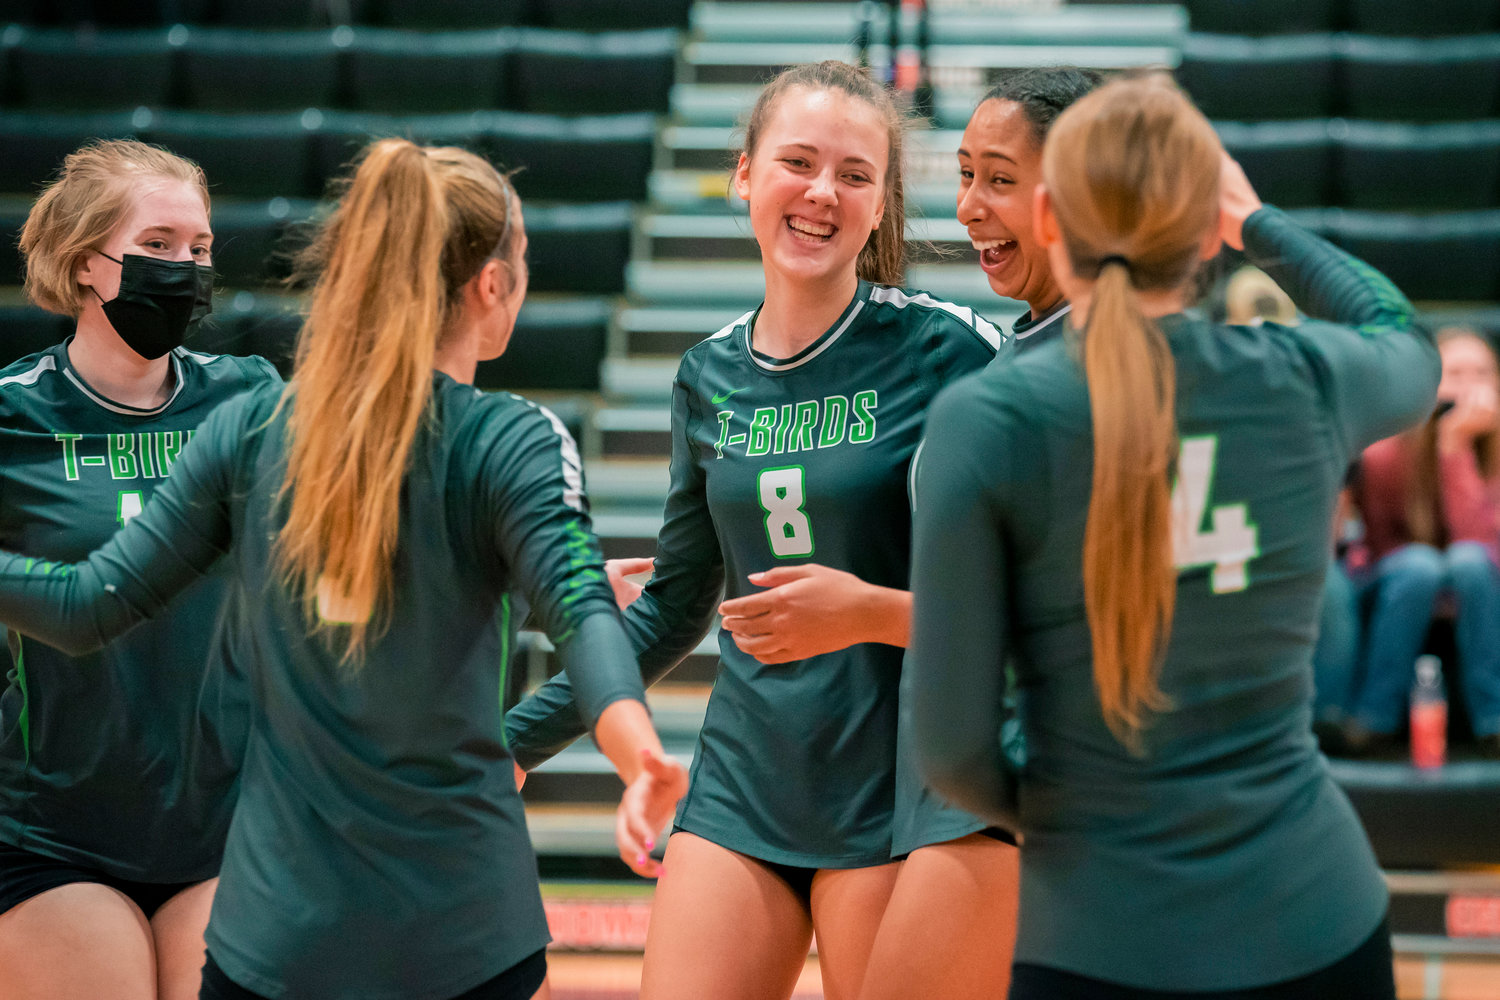 Tumwater athletes smile and celebrate after a score Tuesday night during a volleyball against Centralia.